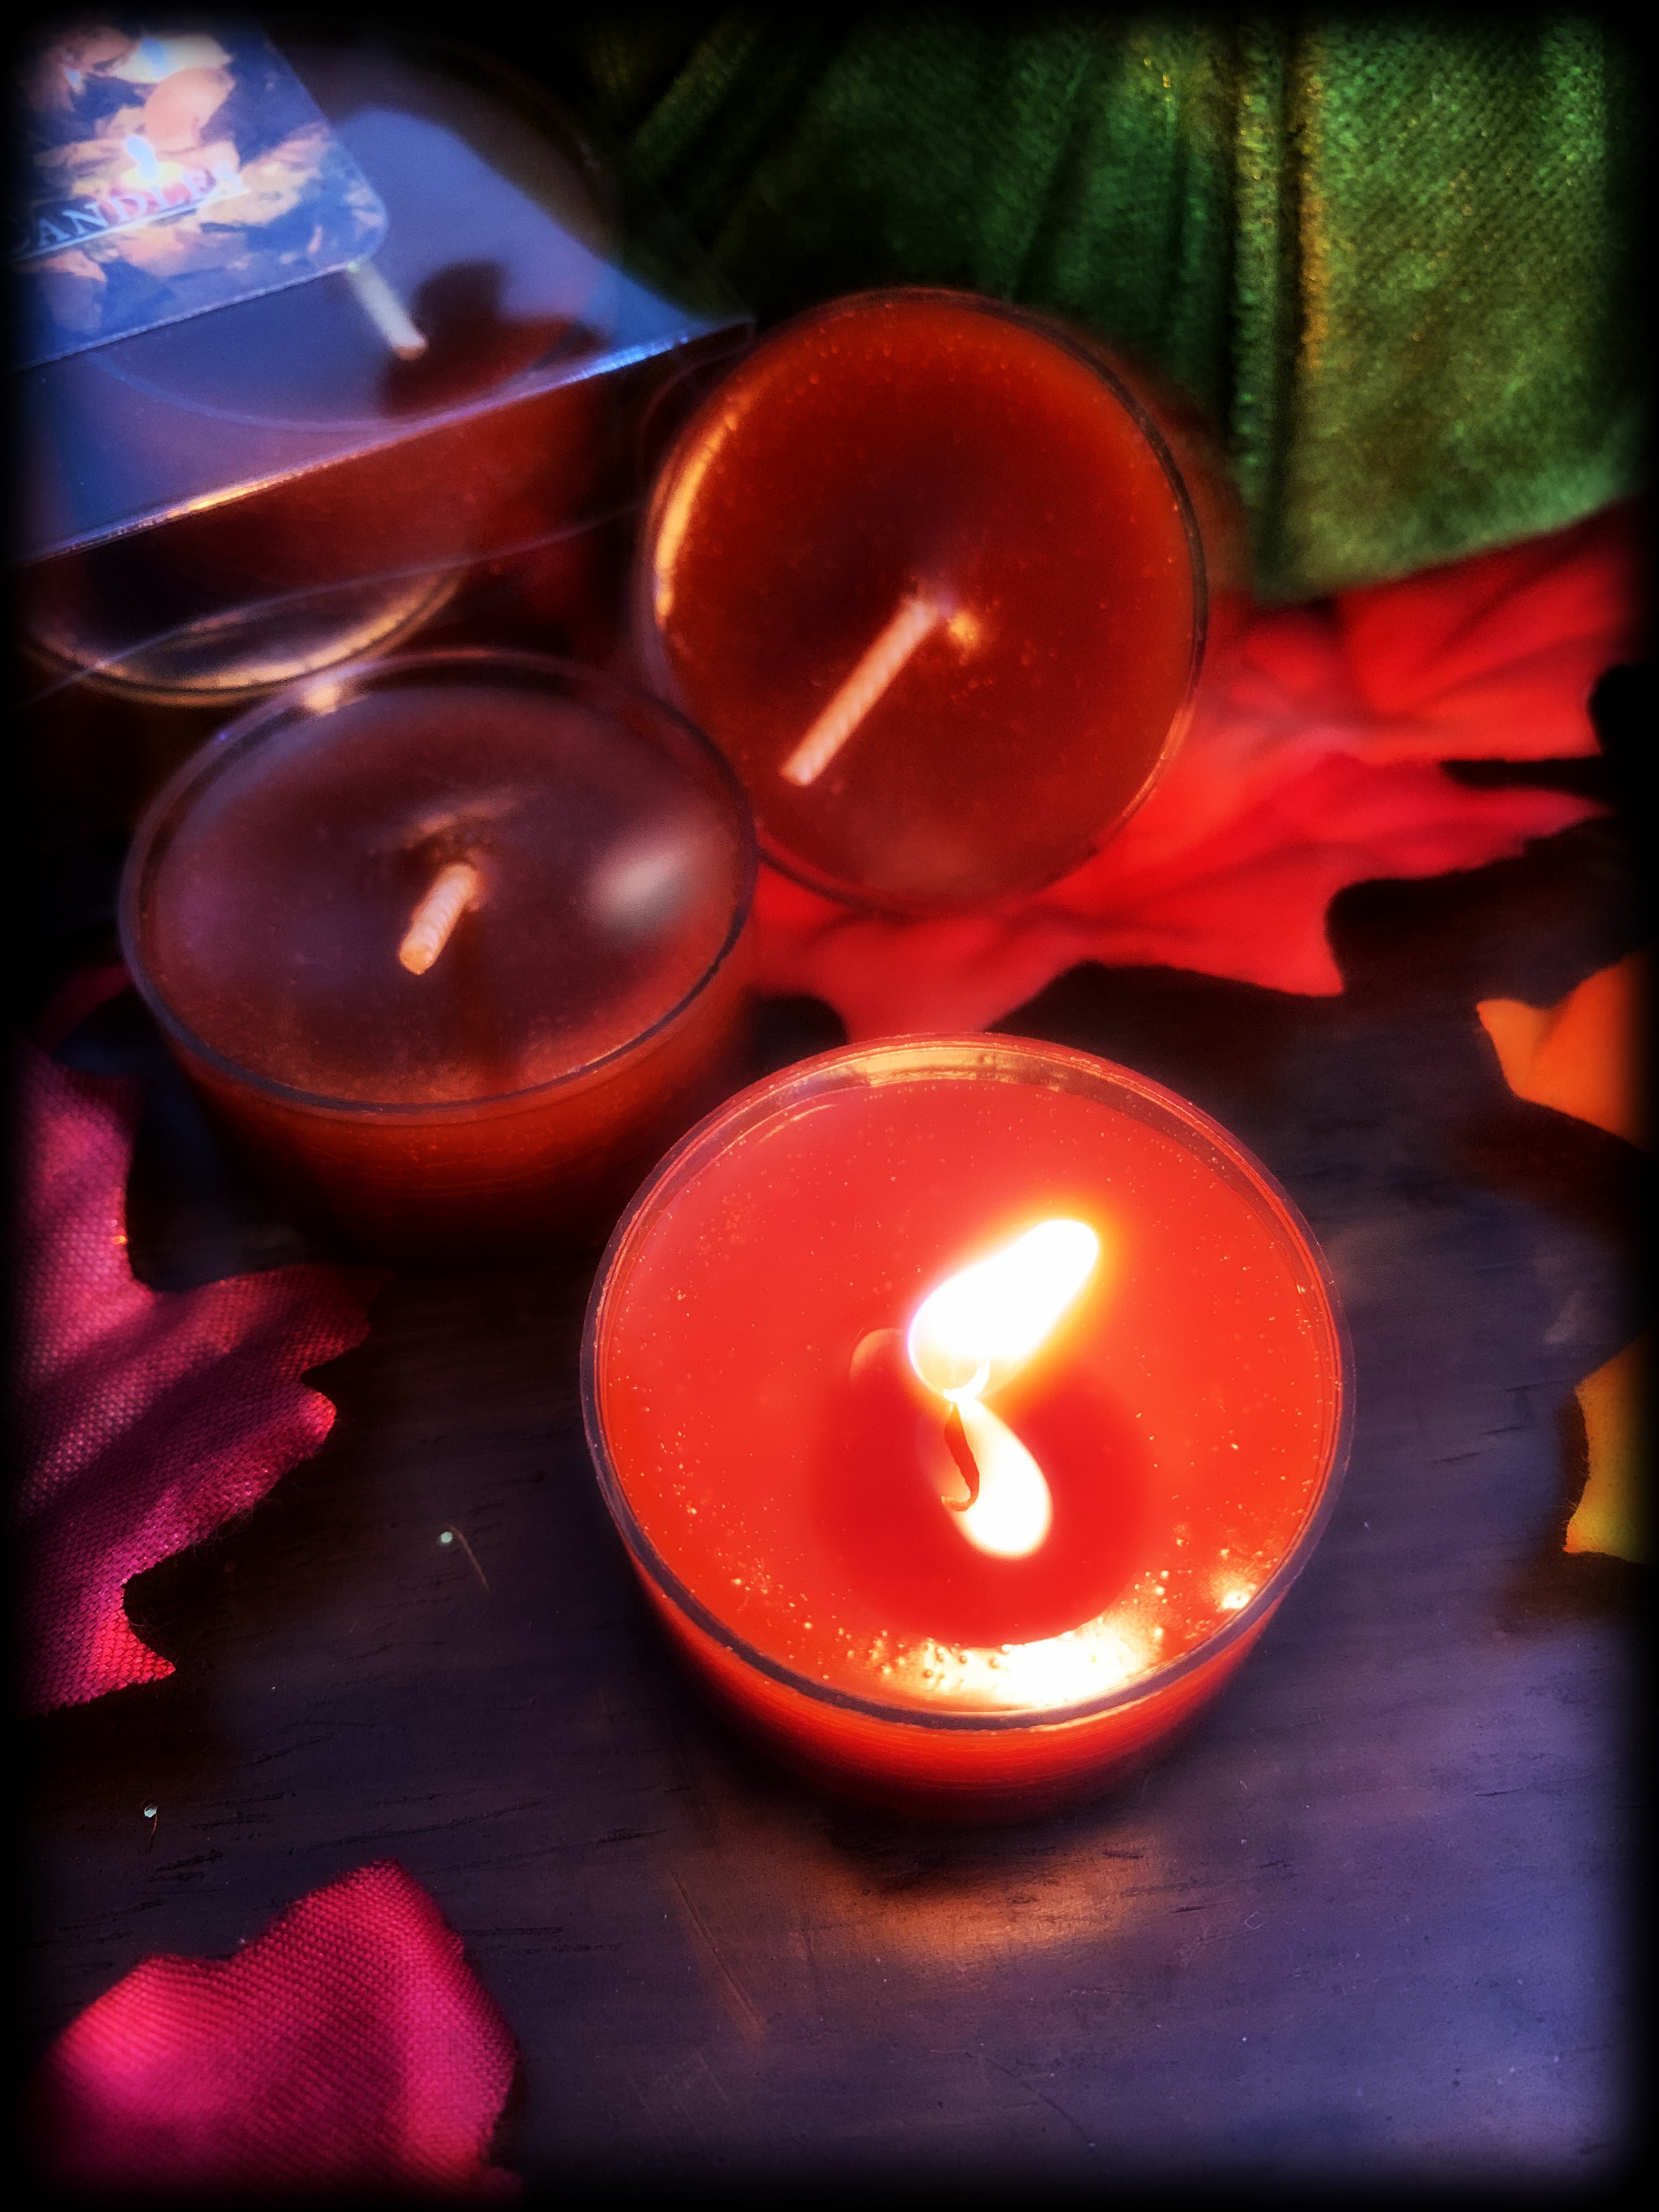 HARVEST SEASON ~ Hand Poured Highly Fragranced Tealight Candles